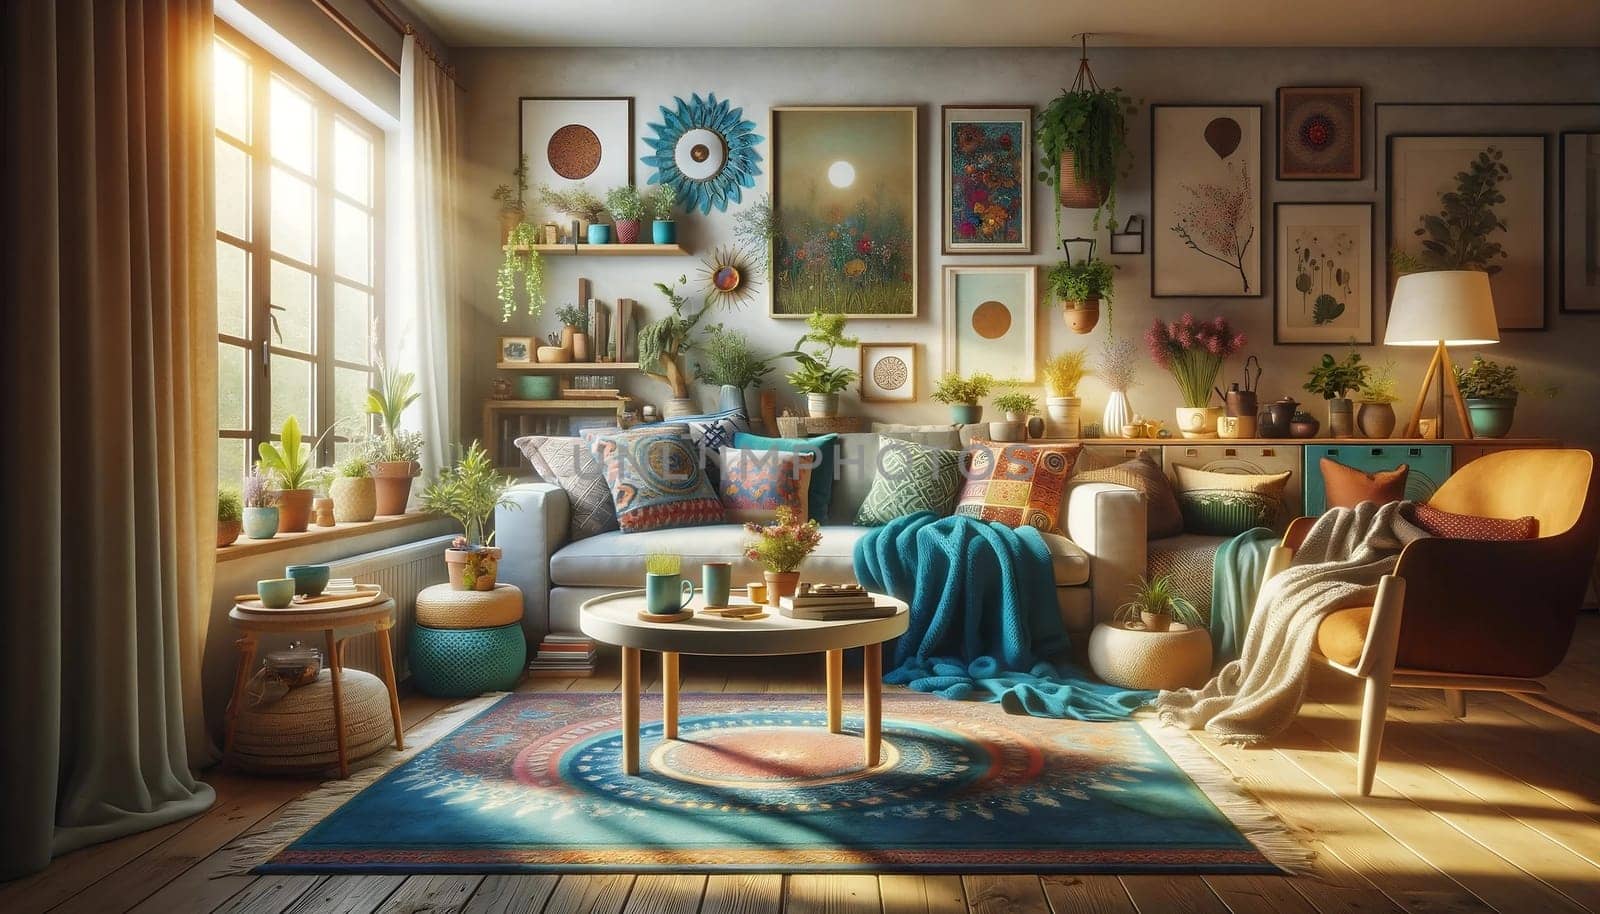 Sunlit Bohemian Oasis: A Cozy Living Room Bathed in Warm Sunlight, Boho Style by SweCreatives